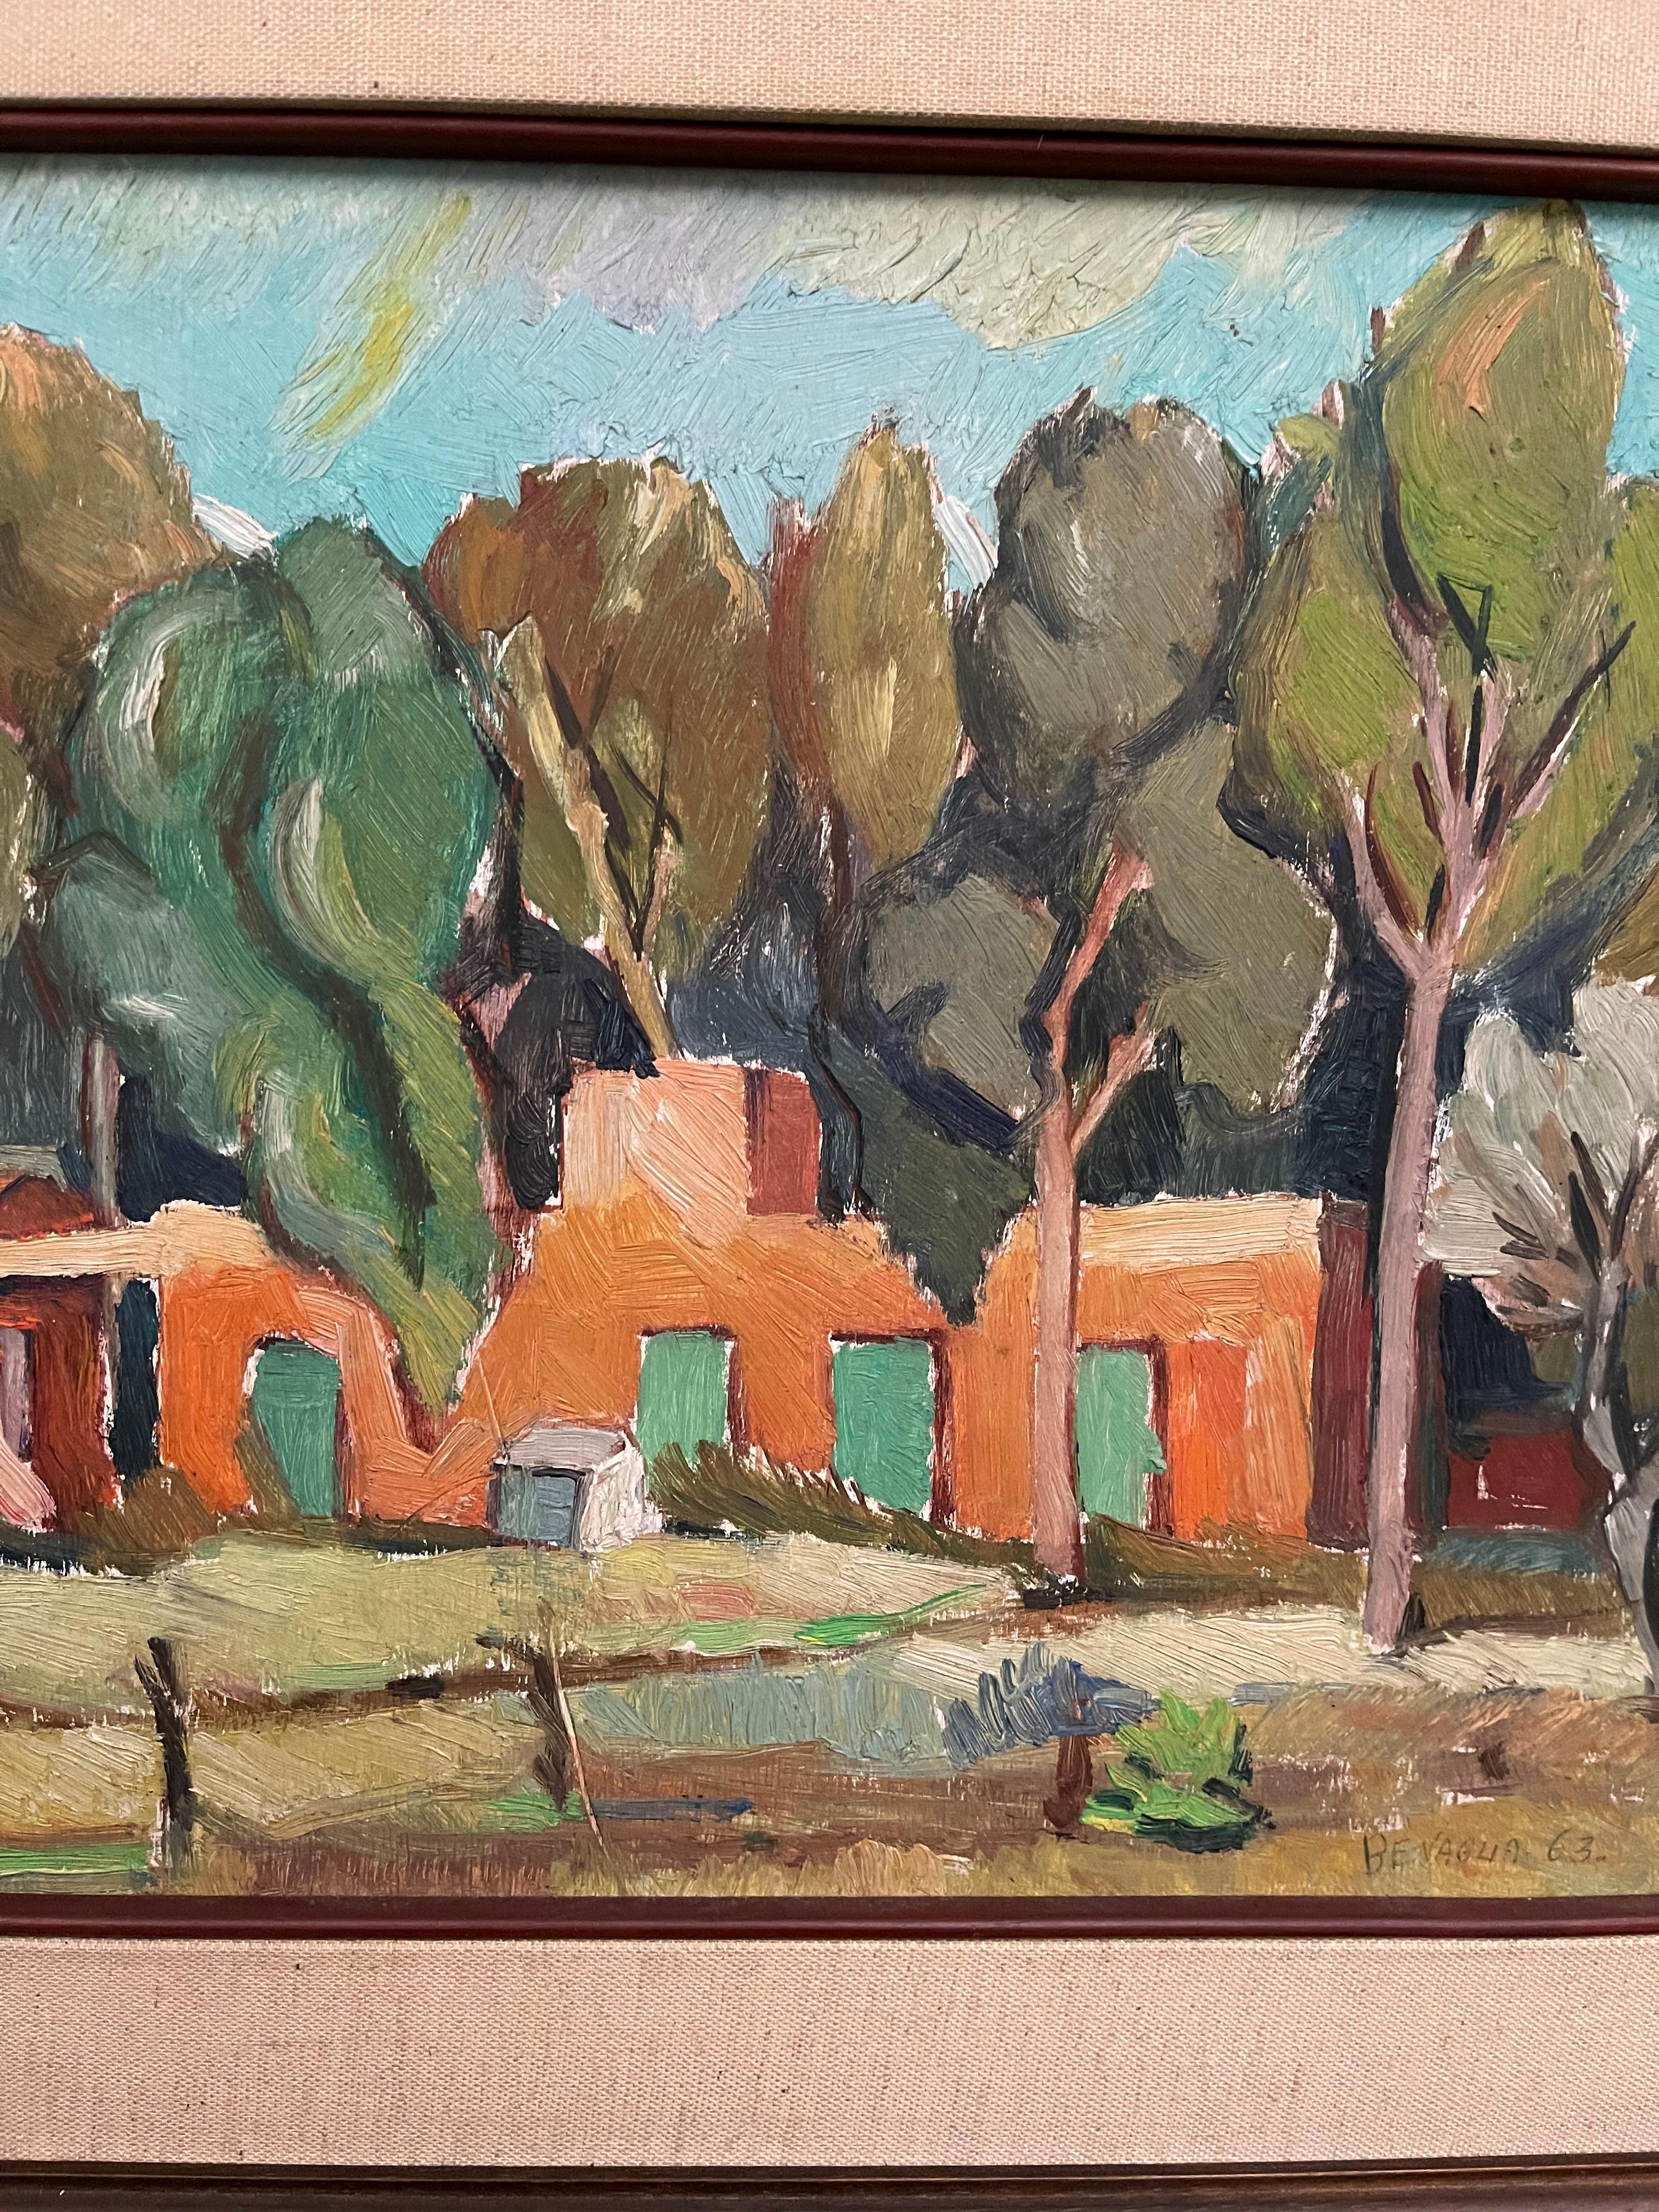 Oil on board.
“Italian landscape”
Signed and dated 